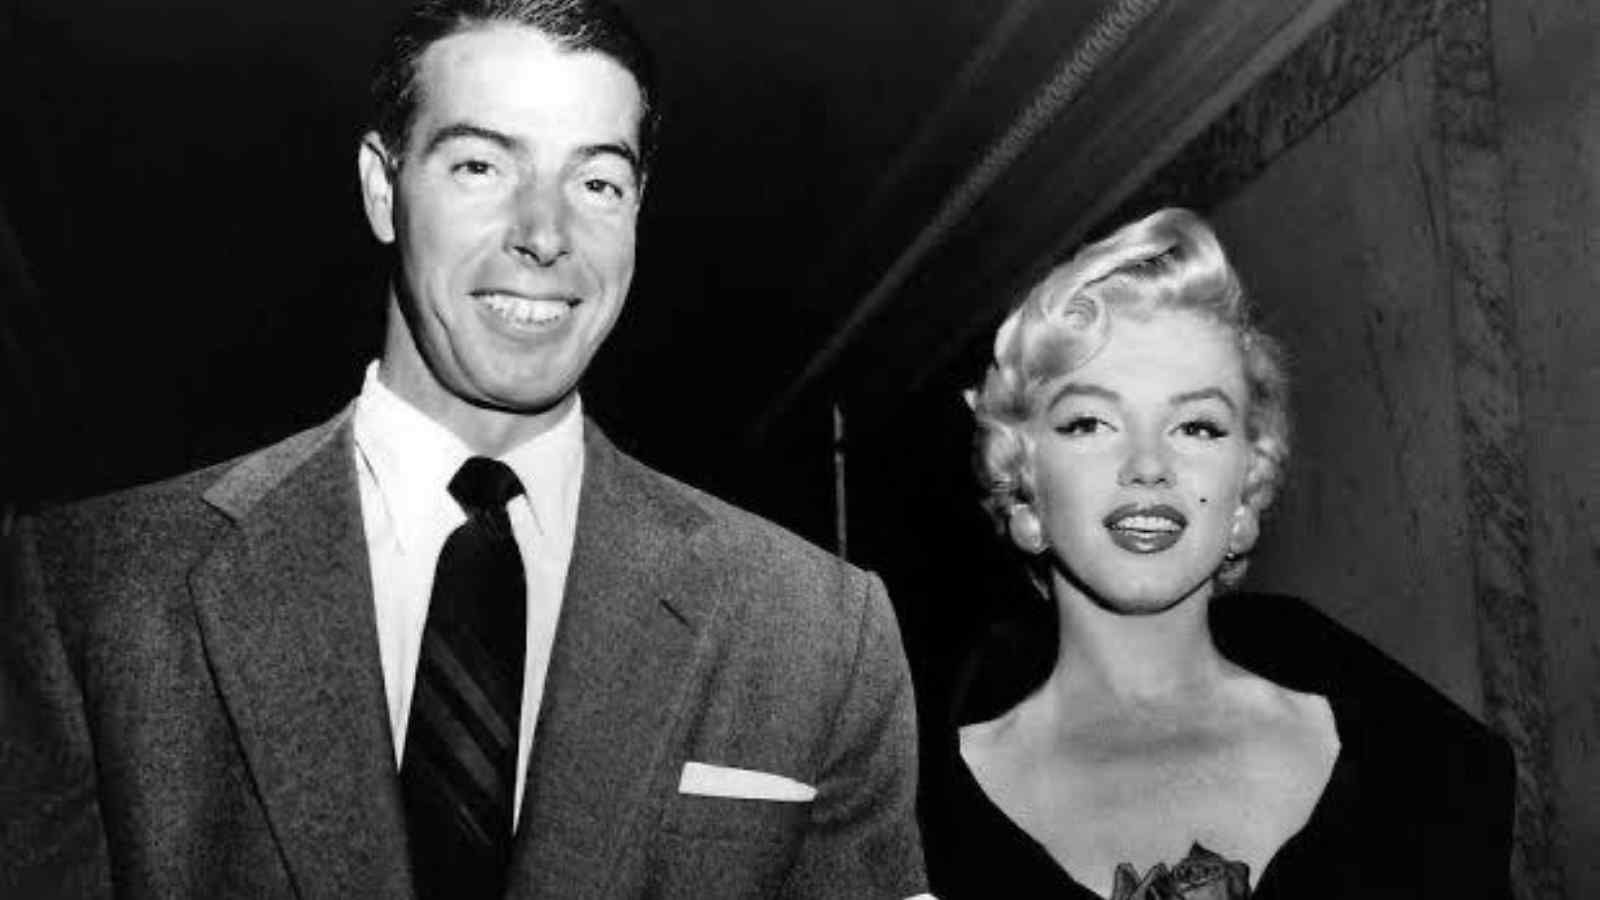 Joe DiMaggio kept sending roses to her Marilyn Monroe's grave three times a week for over two decades 